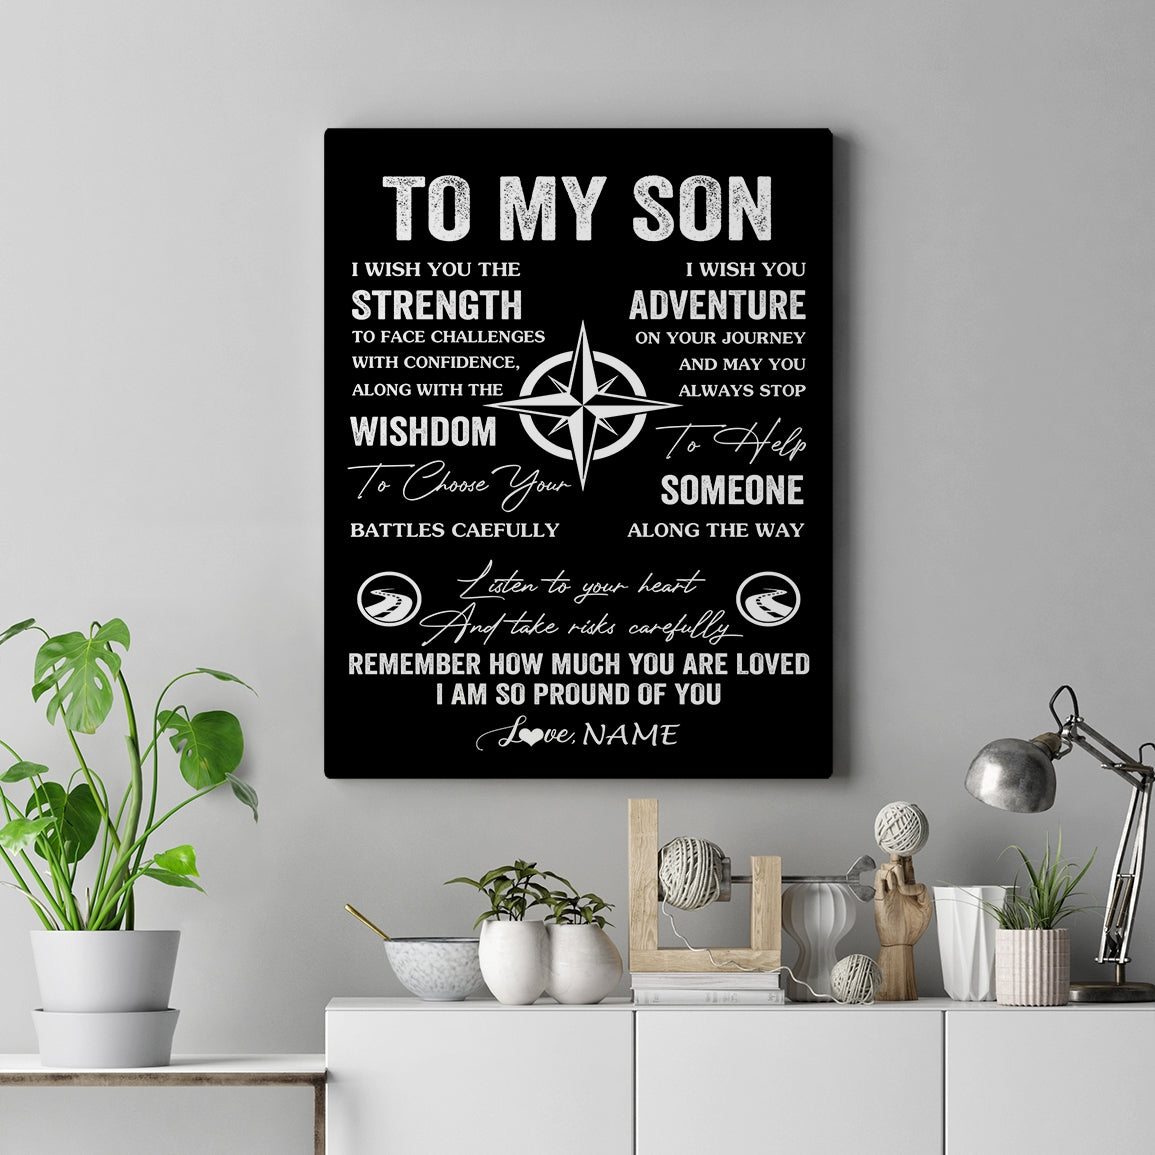 Personalized_To_My_Son_Canvas_From_Mom_Dad_Mother_Father_I_Wish_You_The_Strength_Son_Birthday_Gifts_Graduation_Christmas_Custom_Wall_Art_Print_Framed_Canvas_Canvas_mockup_1.jpg